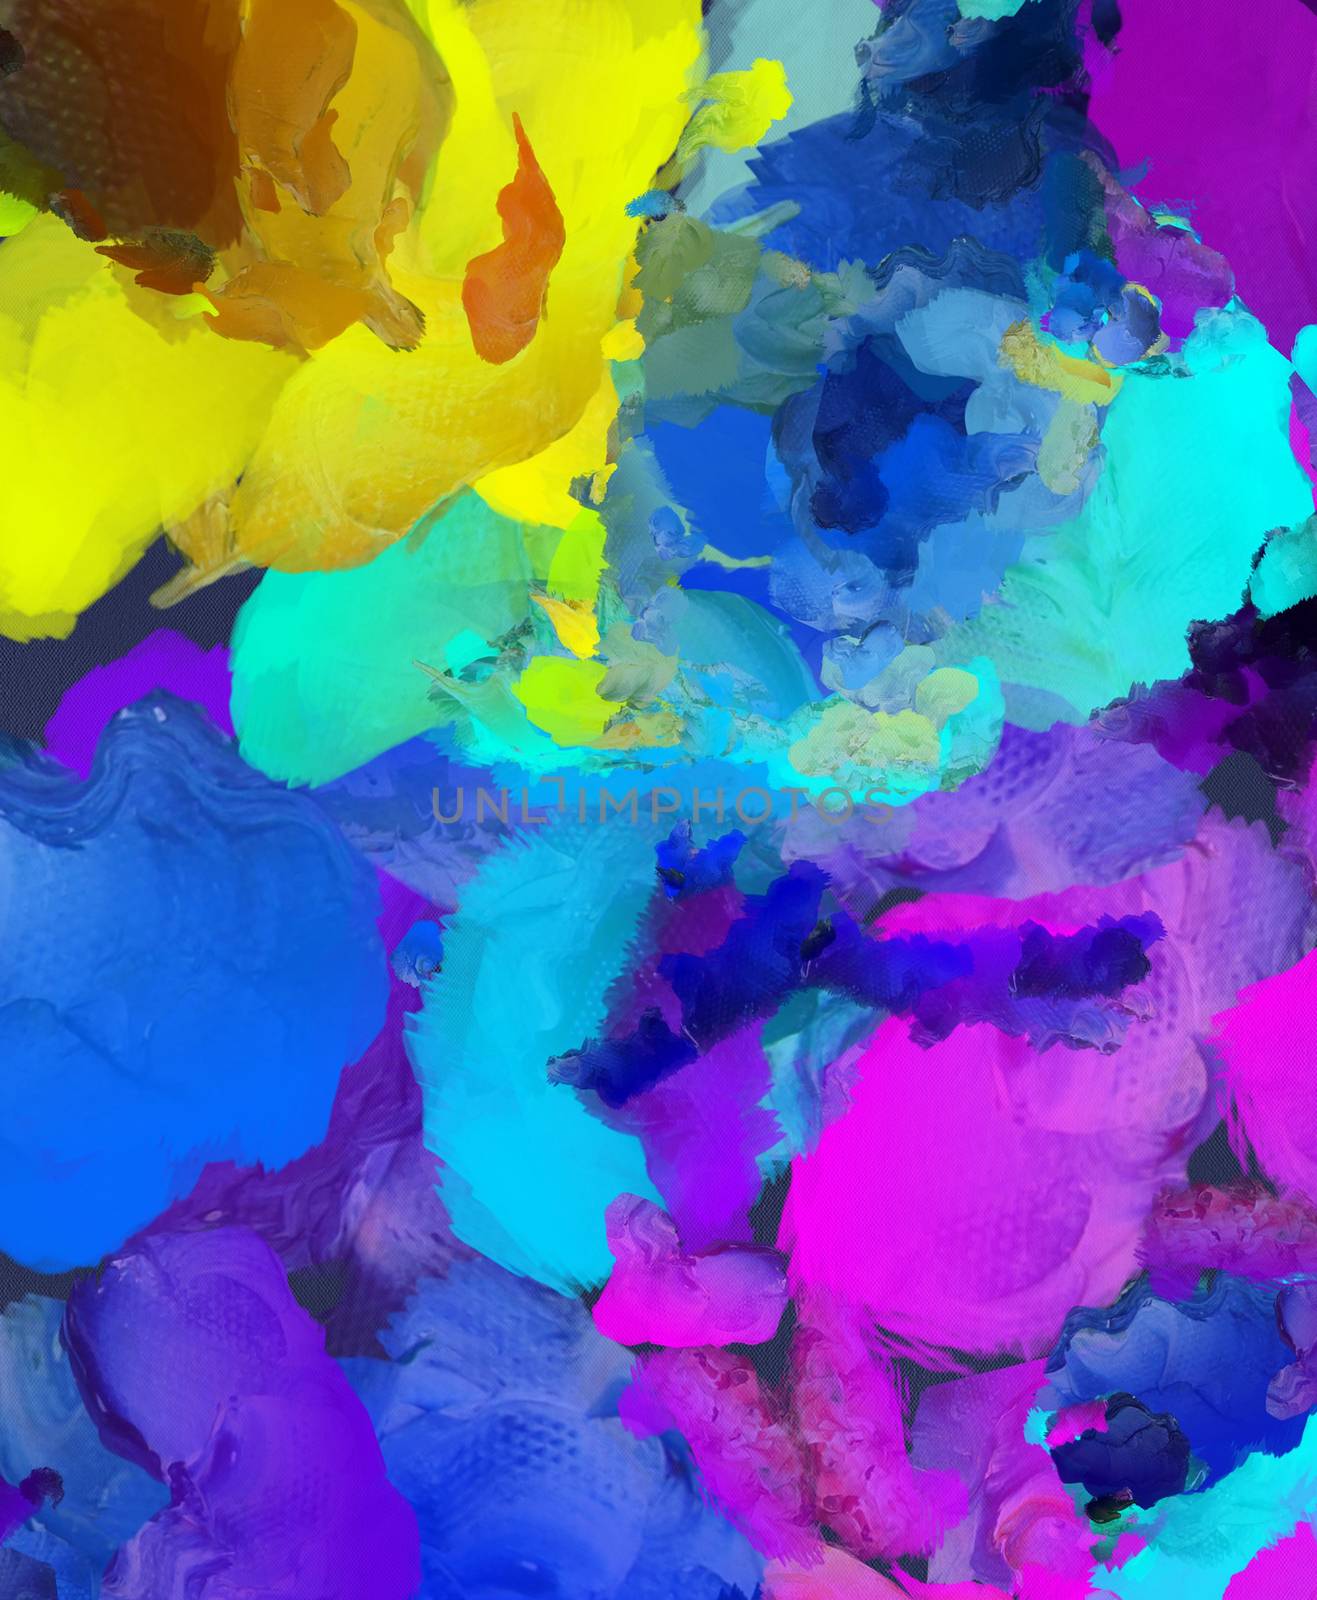 Colorful Abstract Painting. 3D rendering